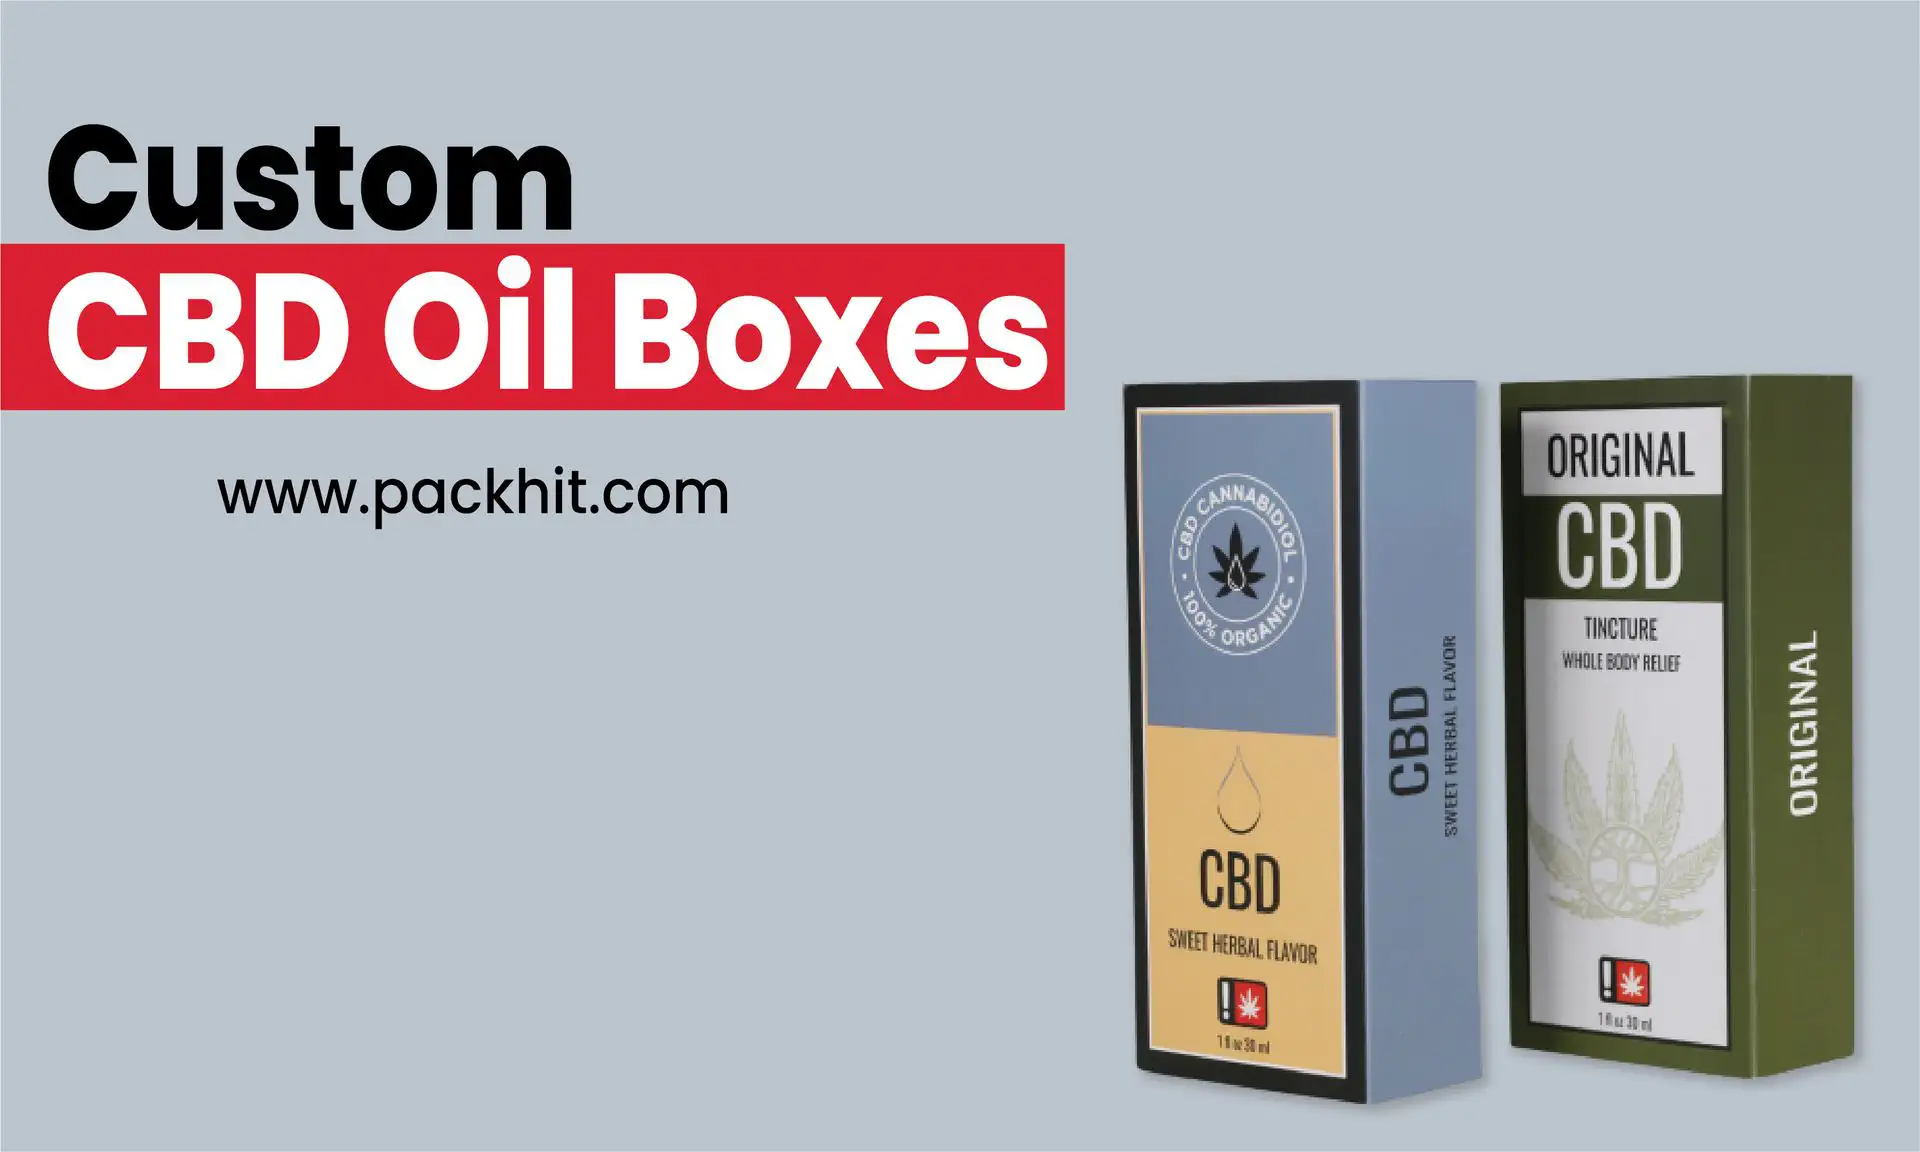 Custom CBD Tincture Boxes with Inserts